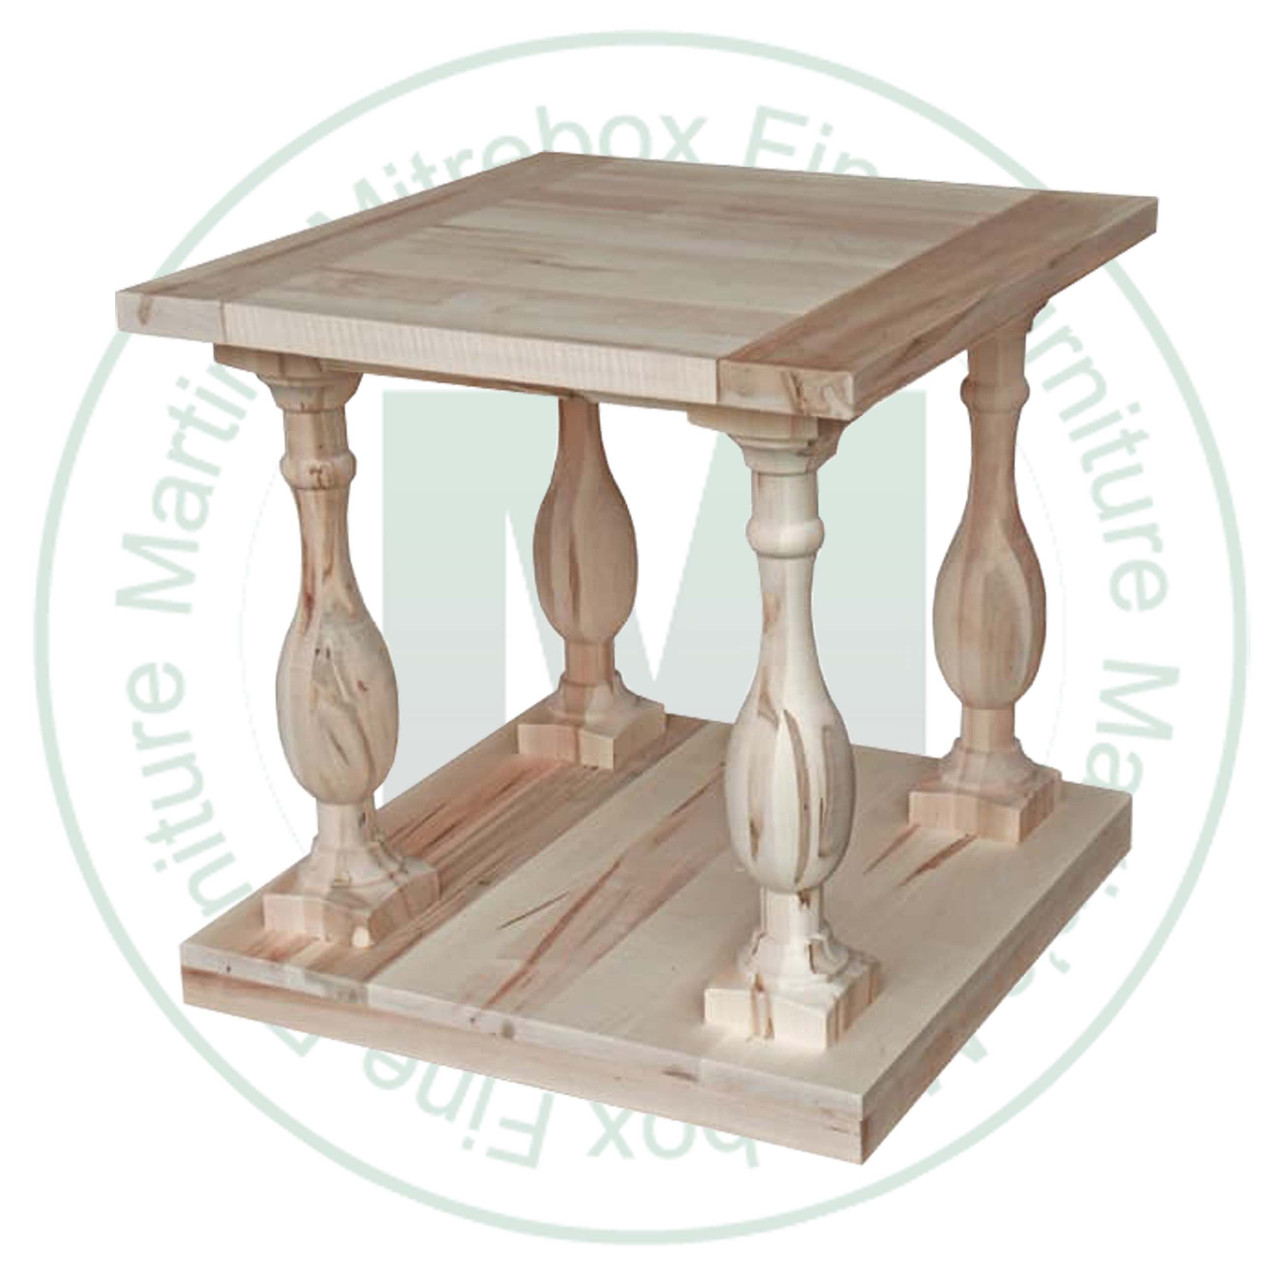 Maple Balustrade End Table 24''D x 24''W x 24''H